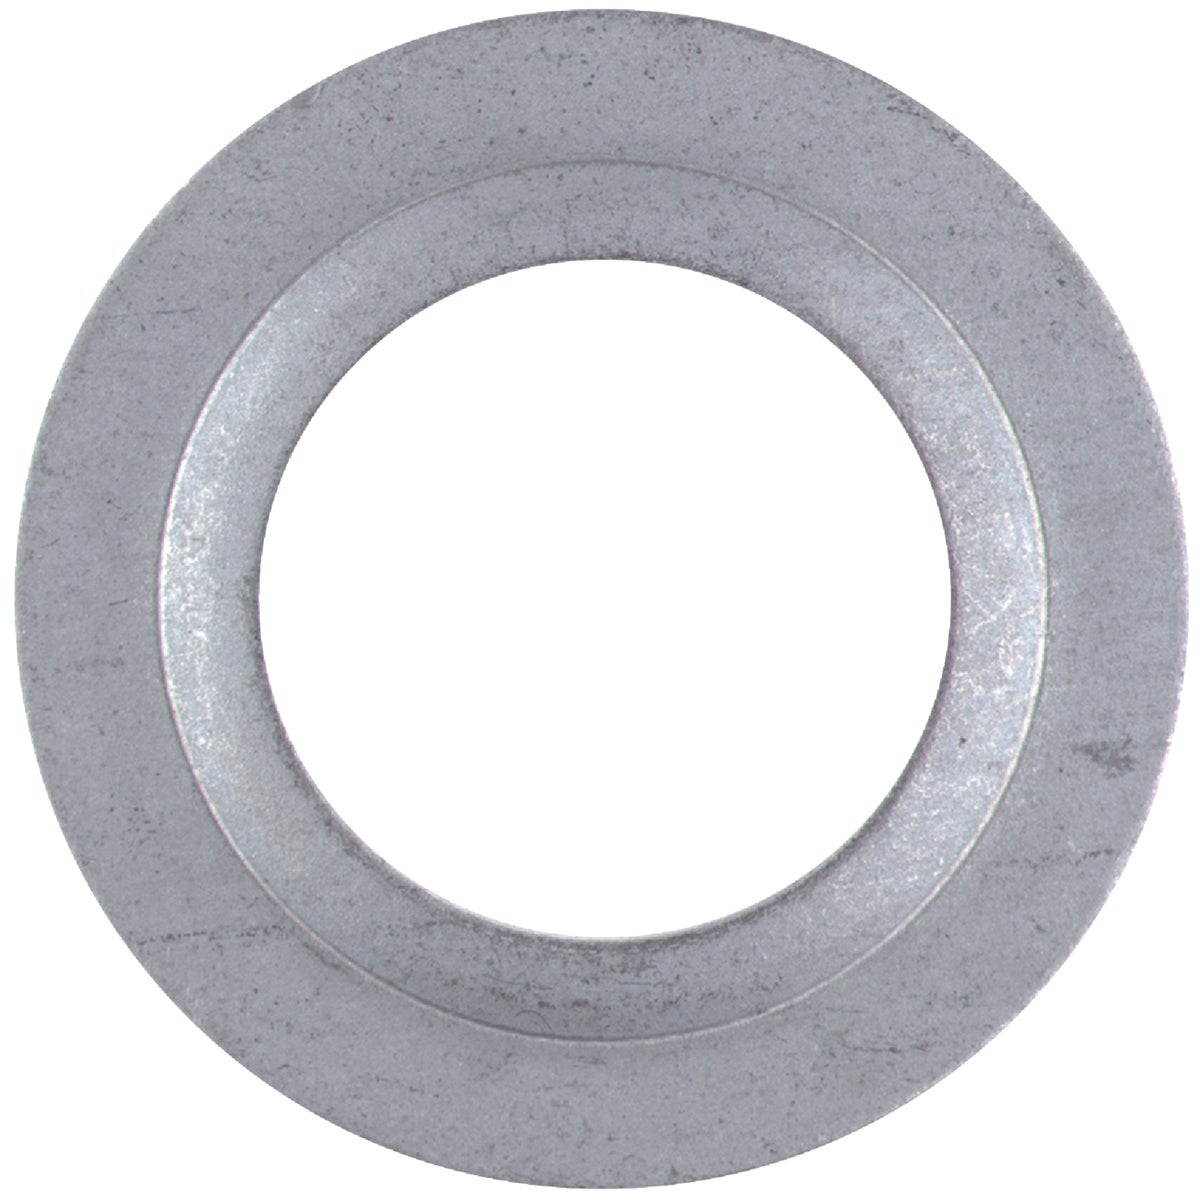 Halex 1 In. to 3/4 In. Plated Steel Rigid Reducing Washer (2-Pack)